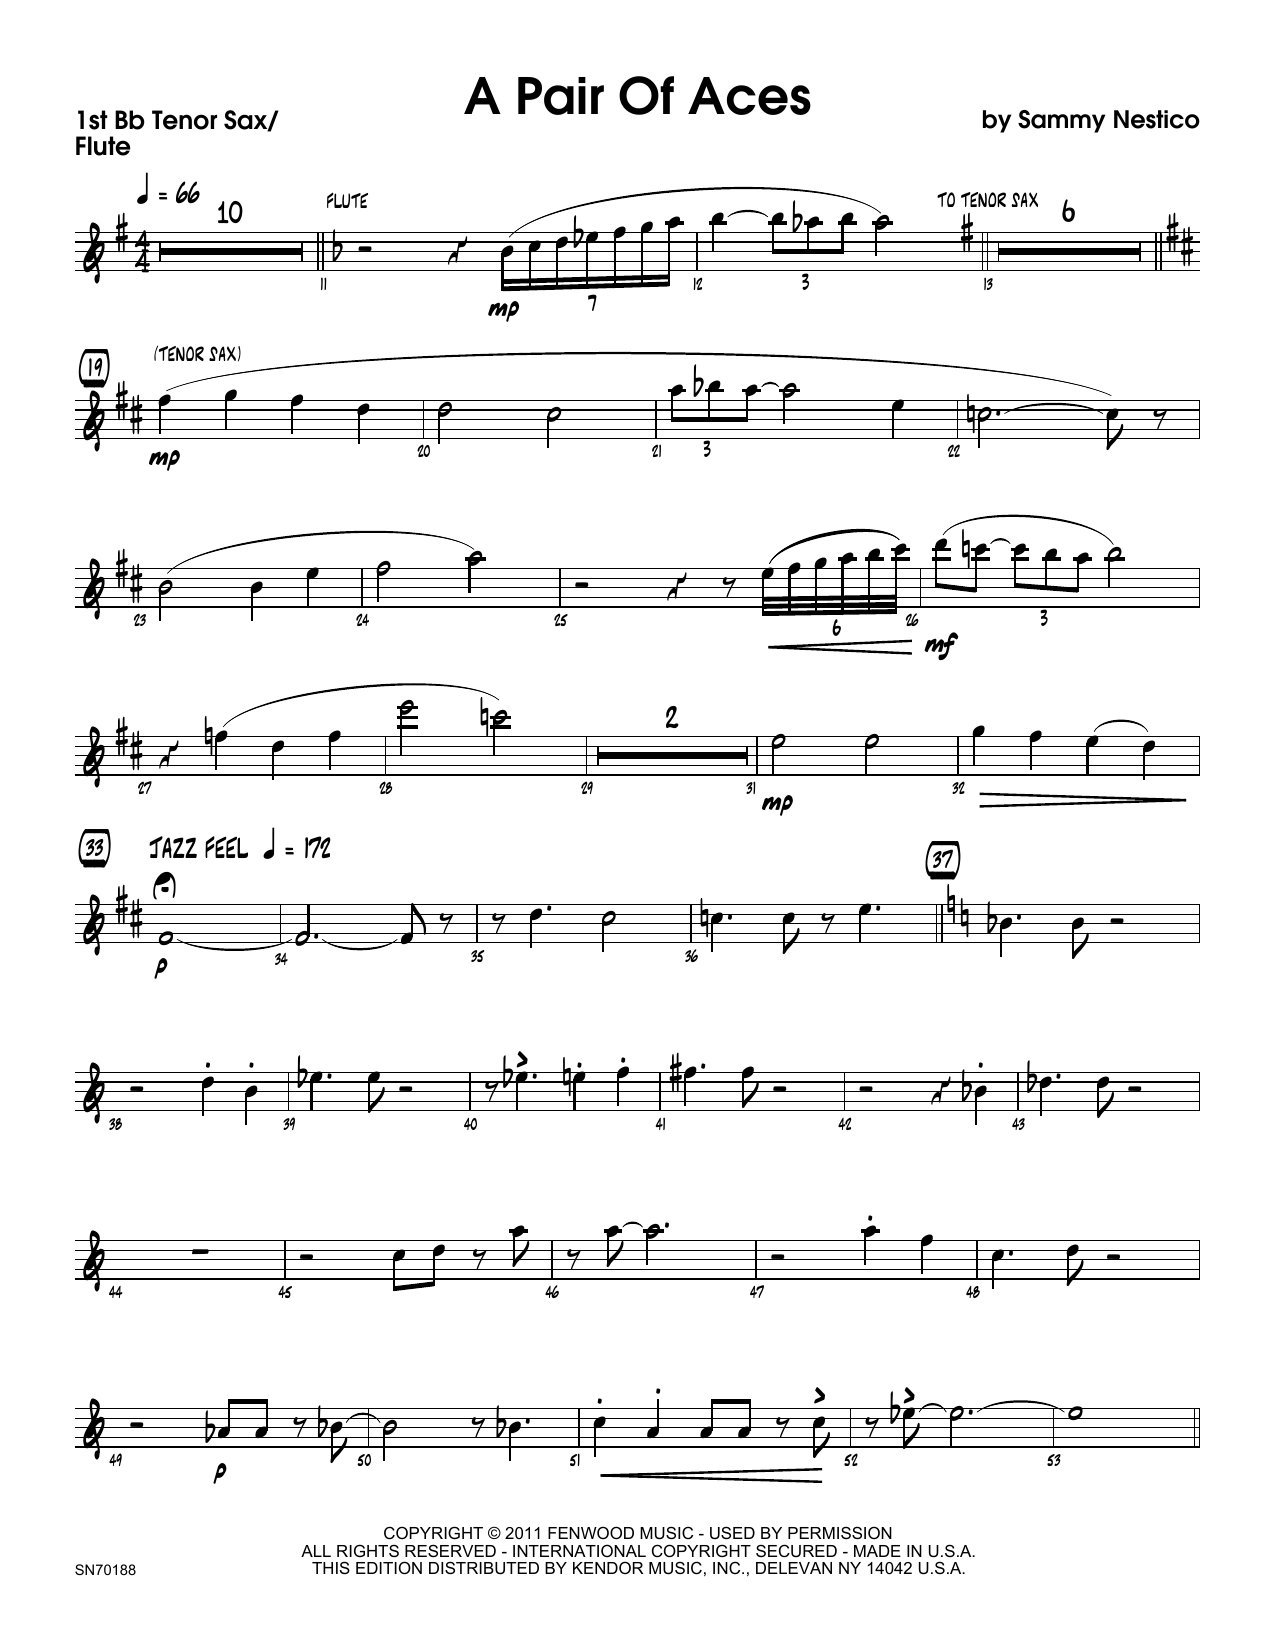 Download Sammy Nestico A Pair Of Aces - 1st Tenor Saxophone Sheet Music